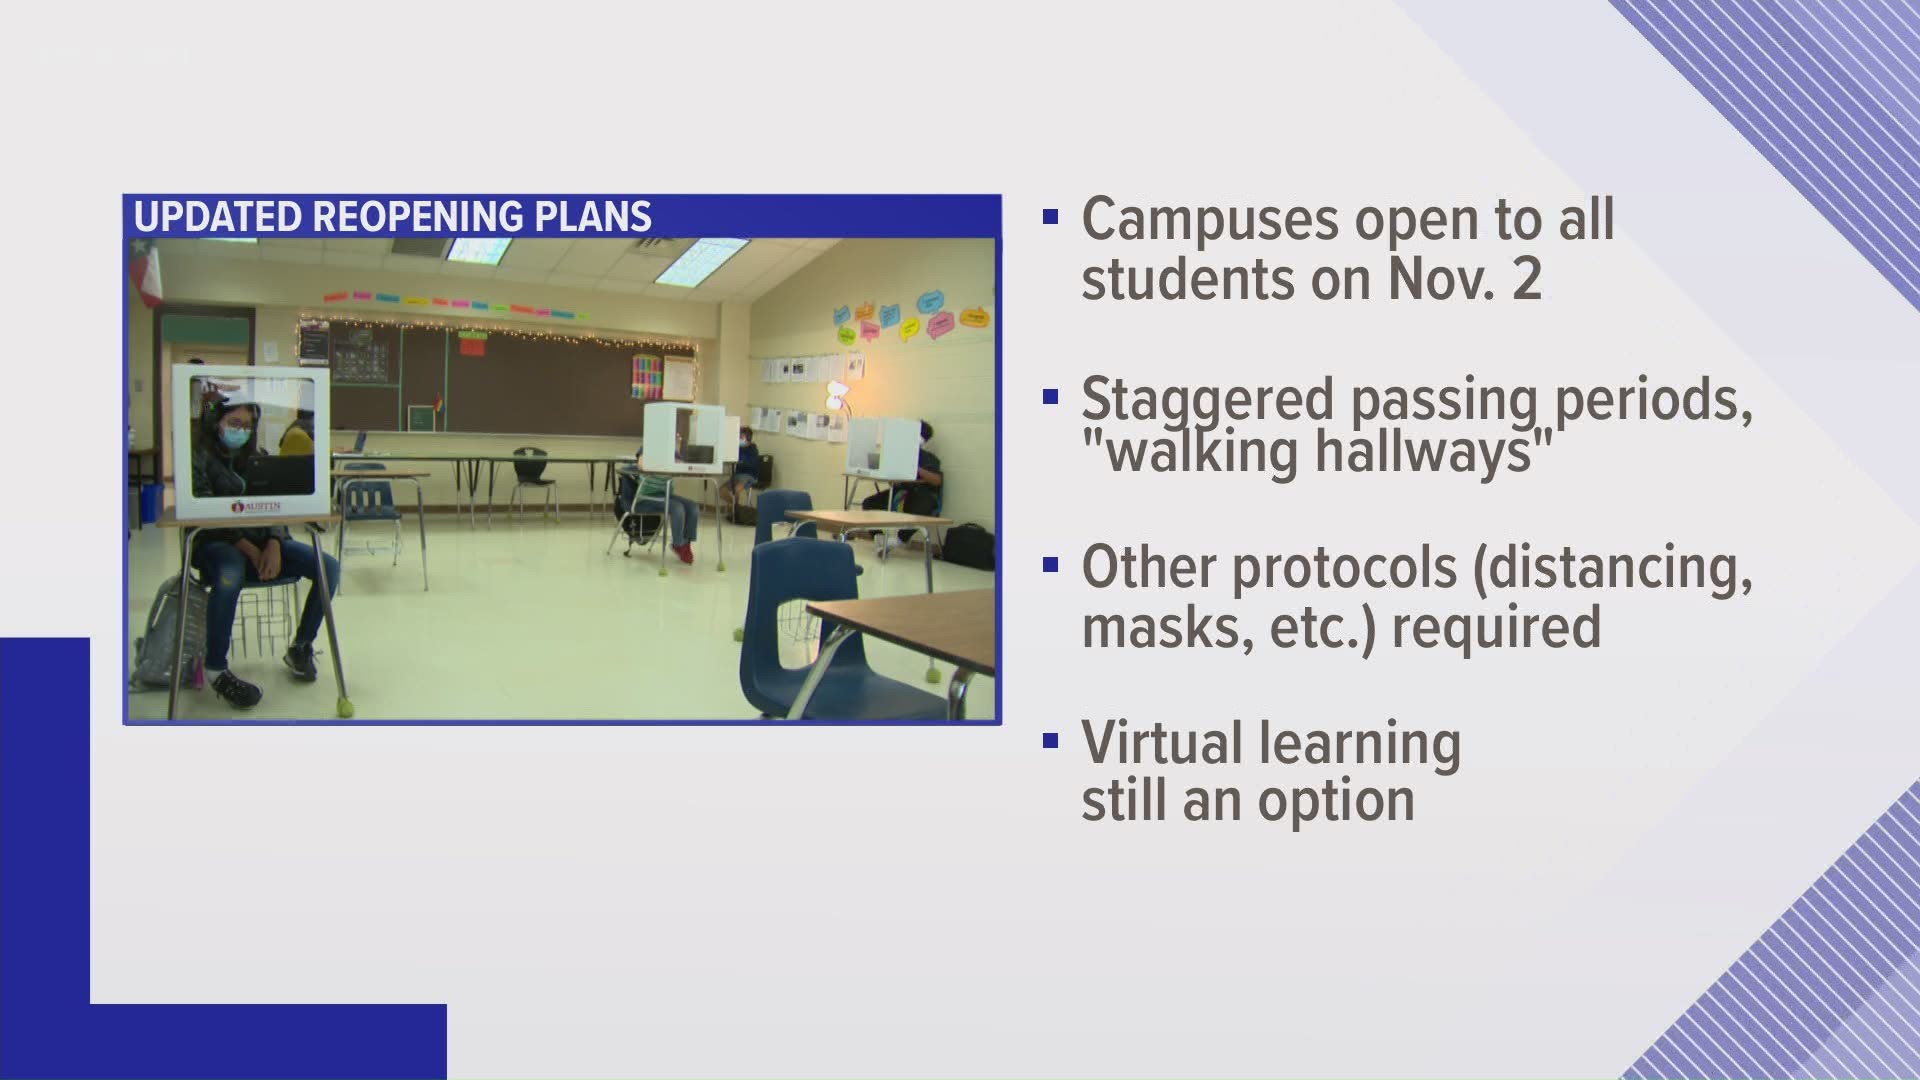 Austin ISD updated its reopening plans Wednesday. One update is that schools will stagger passing periods for students and make "walking hallways."